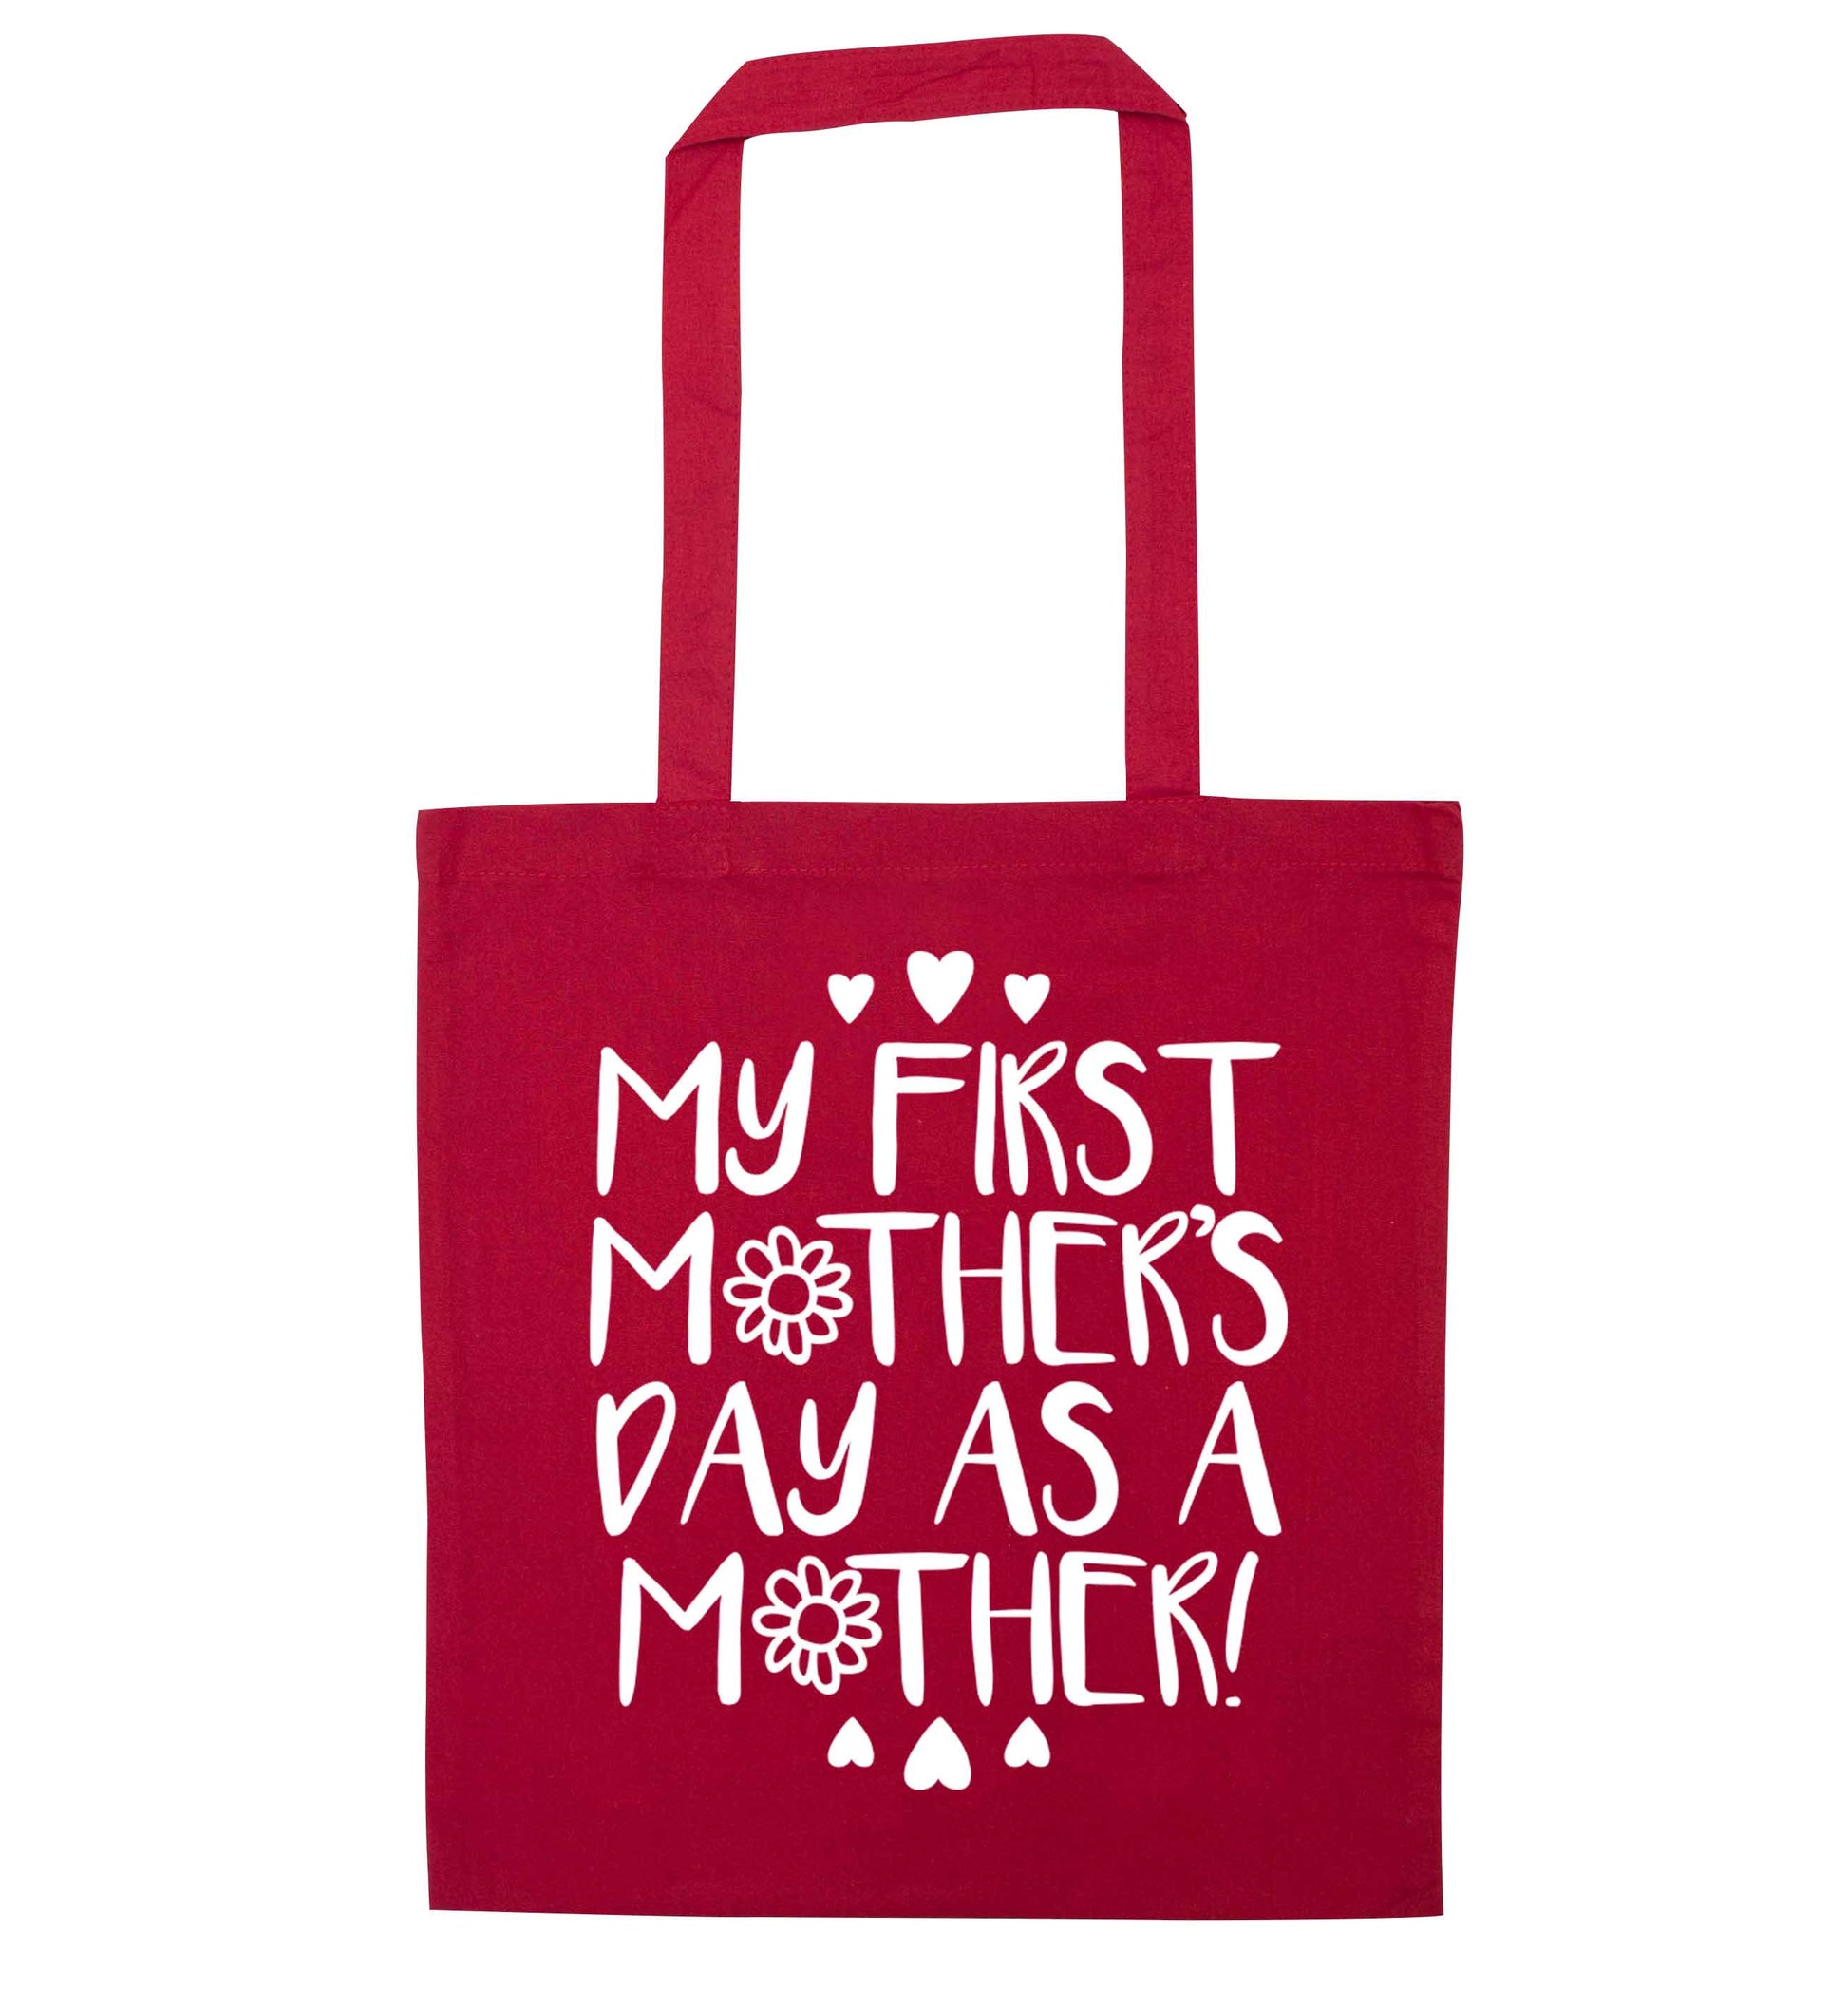 It's my first mother's day as a mother red tote bag